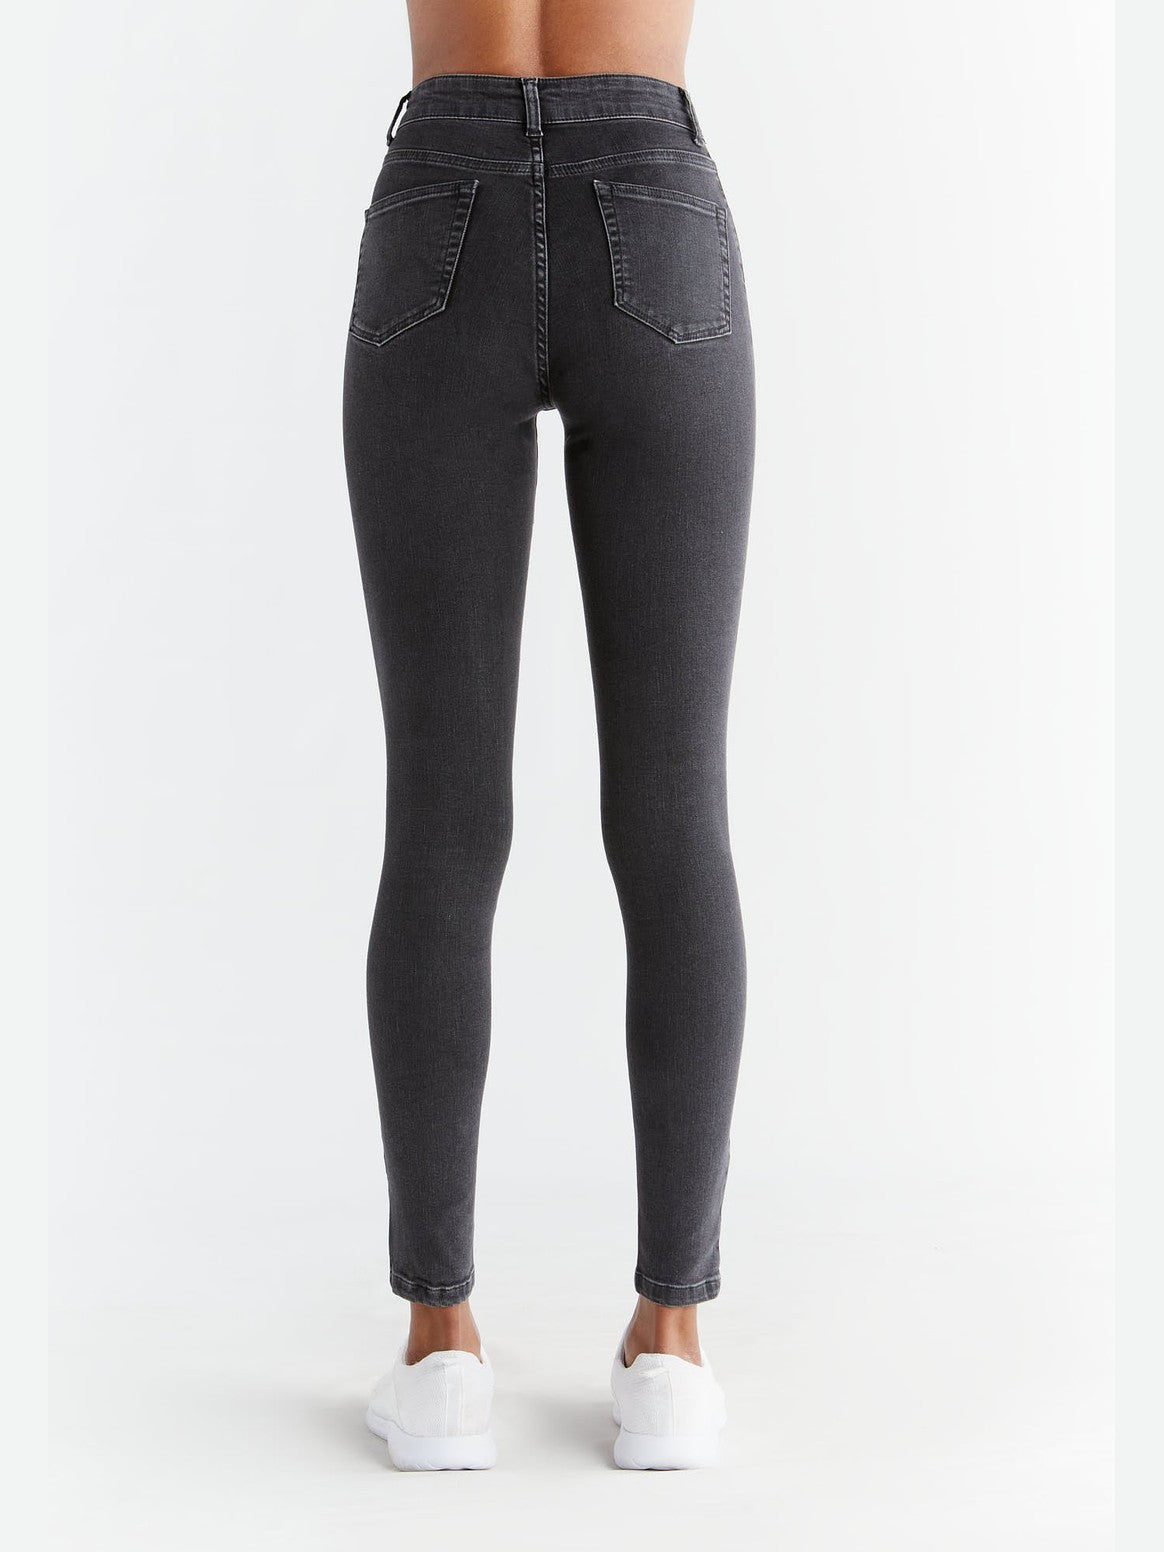 WD1015-145 | Women Skinny Fit - Carbon Gray